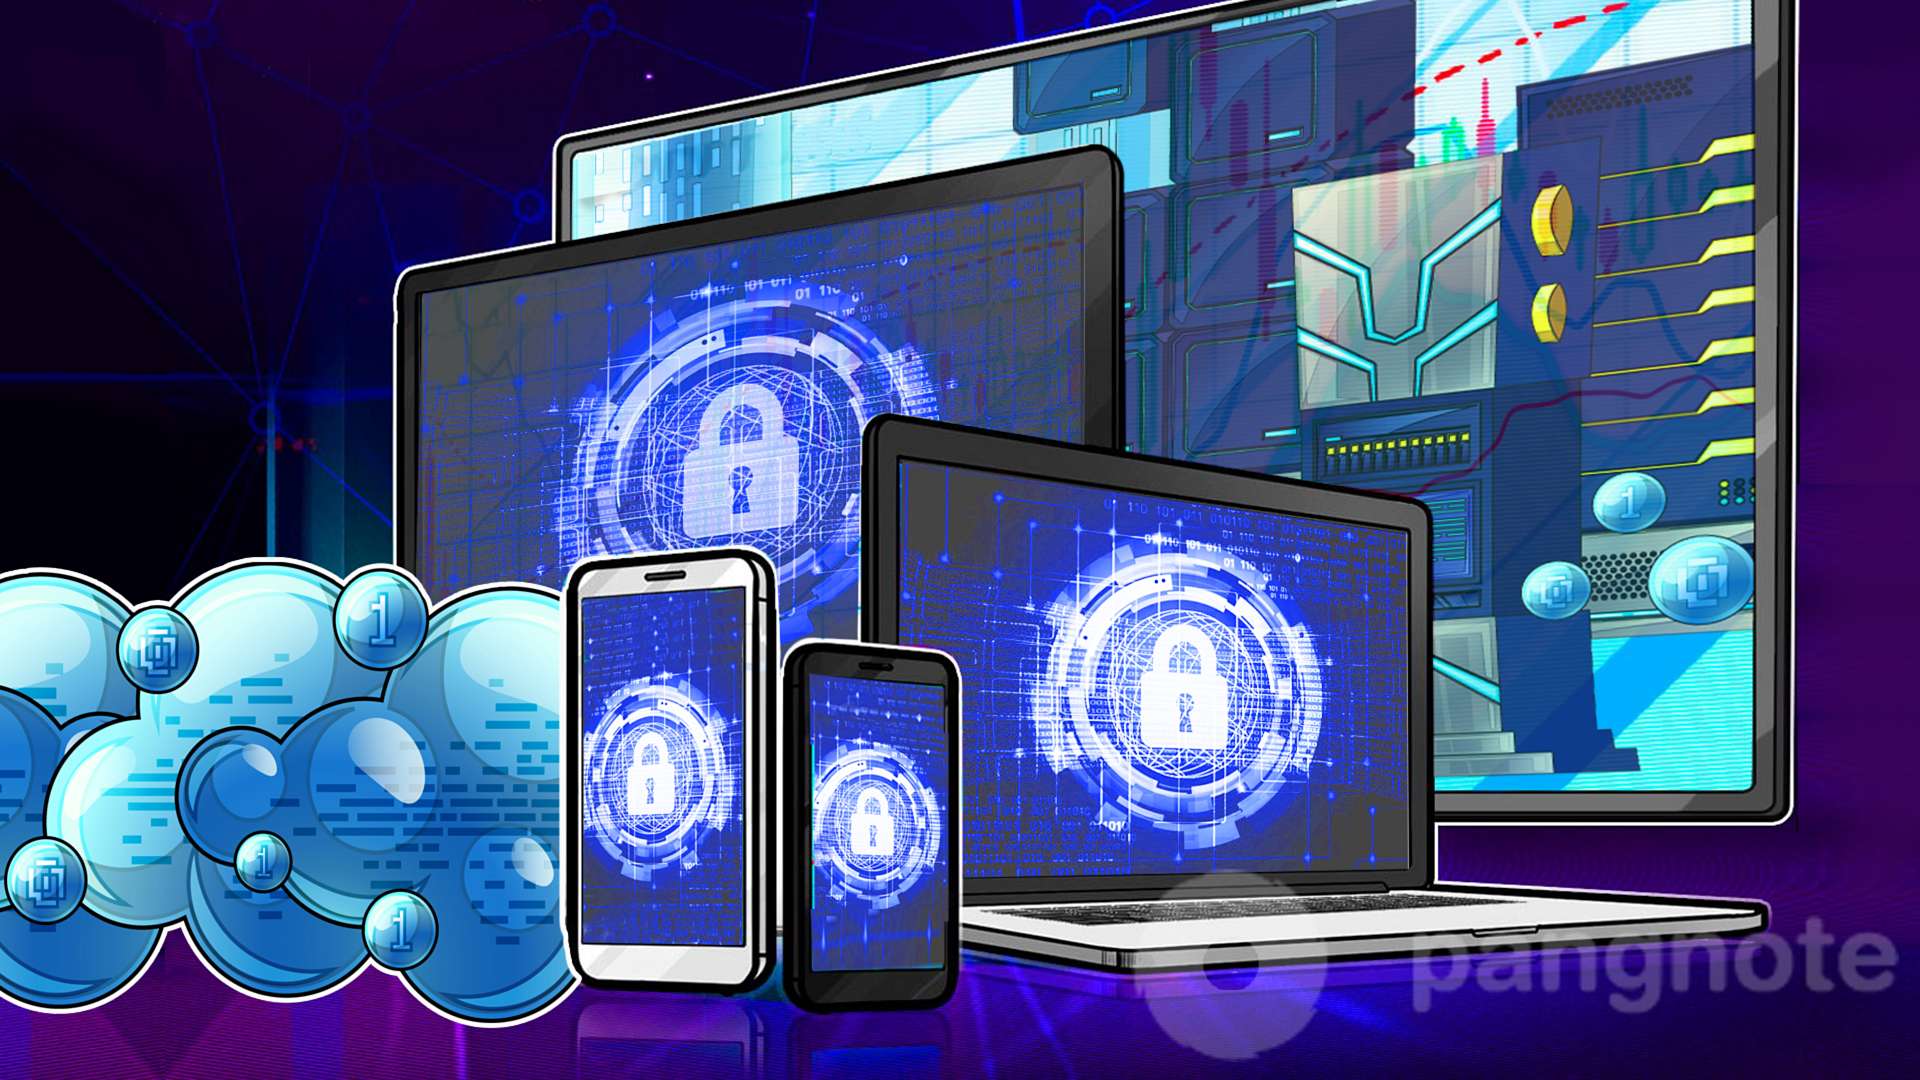 Cybersecurity trends in 2019: from mobile devices and IoT to cloud